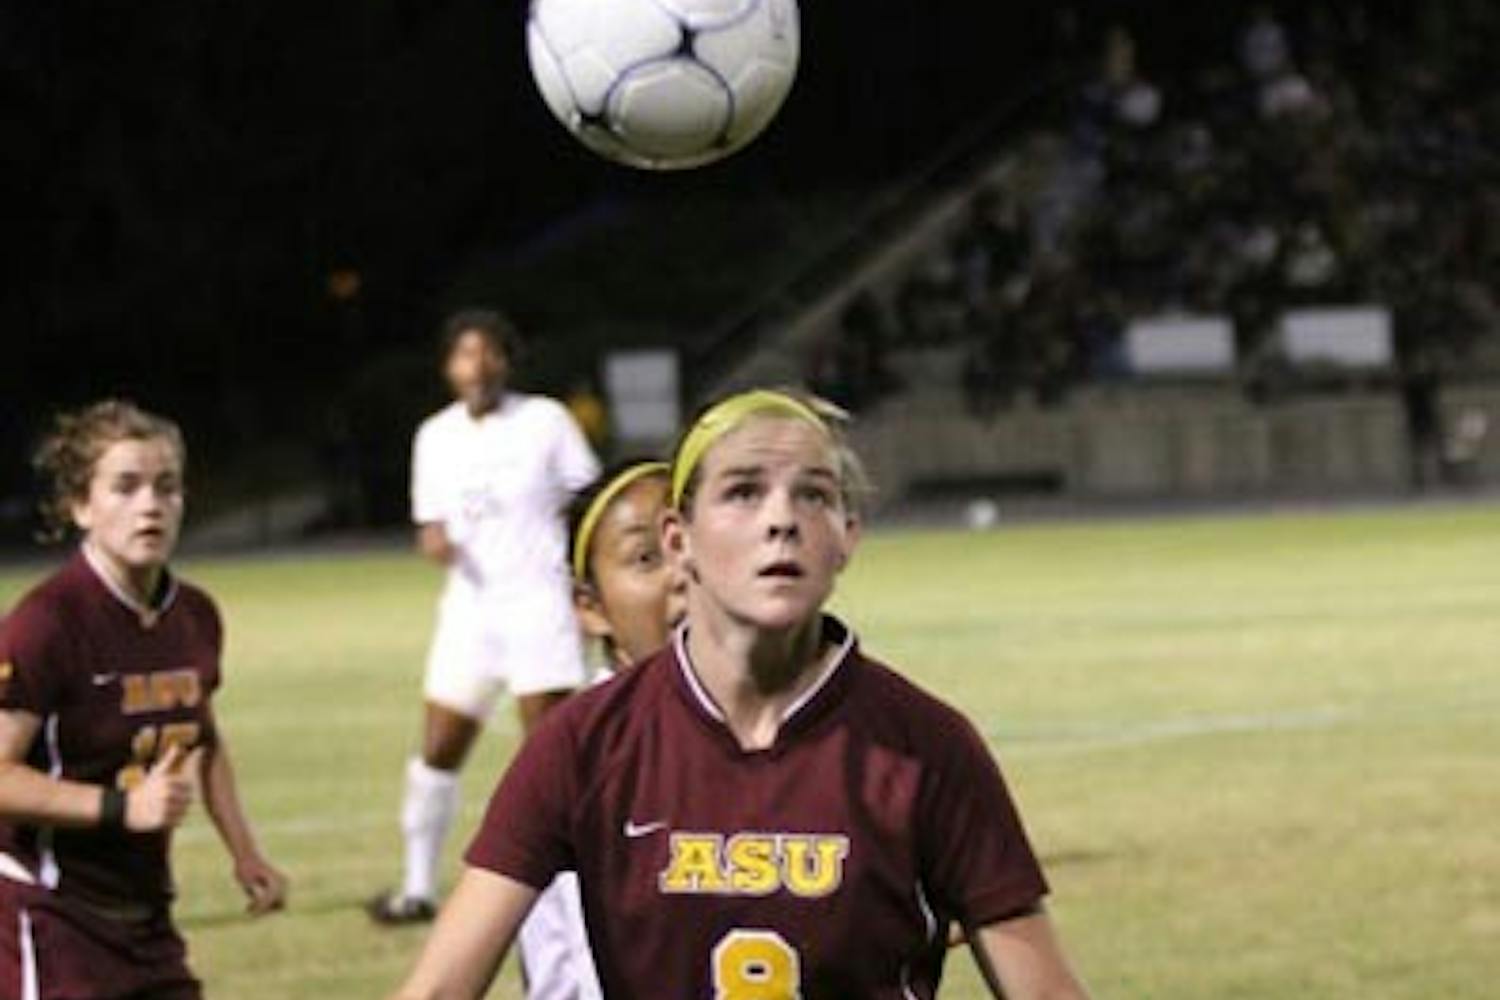 FALLING OUT: Freshman forward Devin Marshall looks to control a ball in the air Friday night against UC Irvine. Marshall scored the Sun Devils only goal in the game, and the ASU women's soccer team was eliminated from the NCAA Tournament. (Photo Courtesy of Steve Rodriguez)